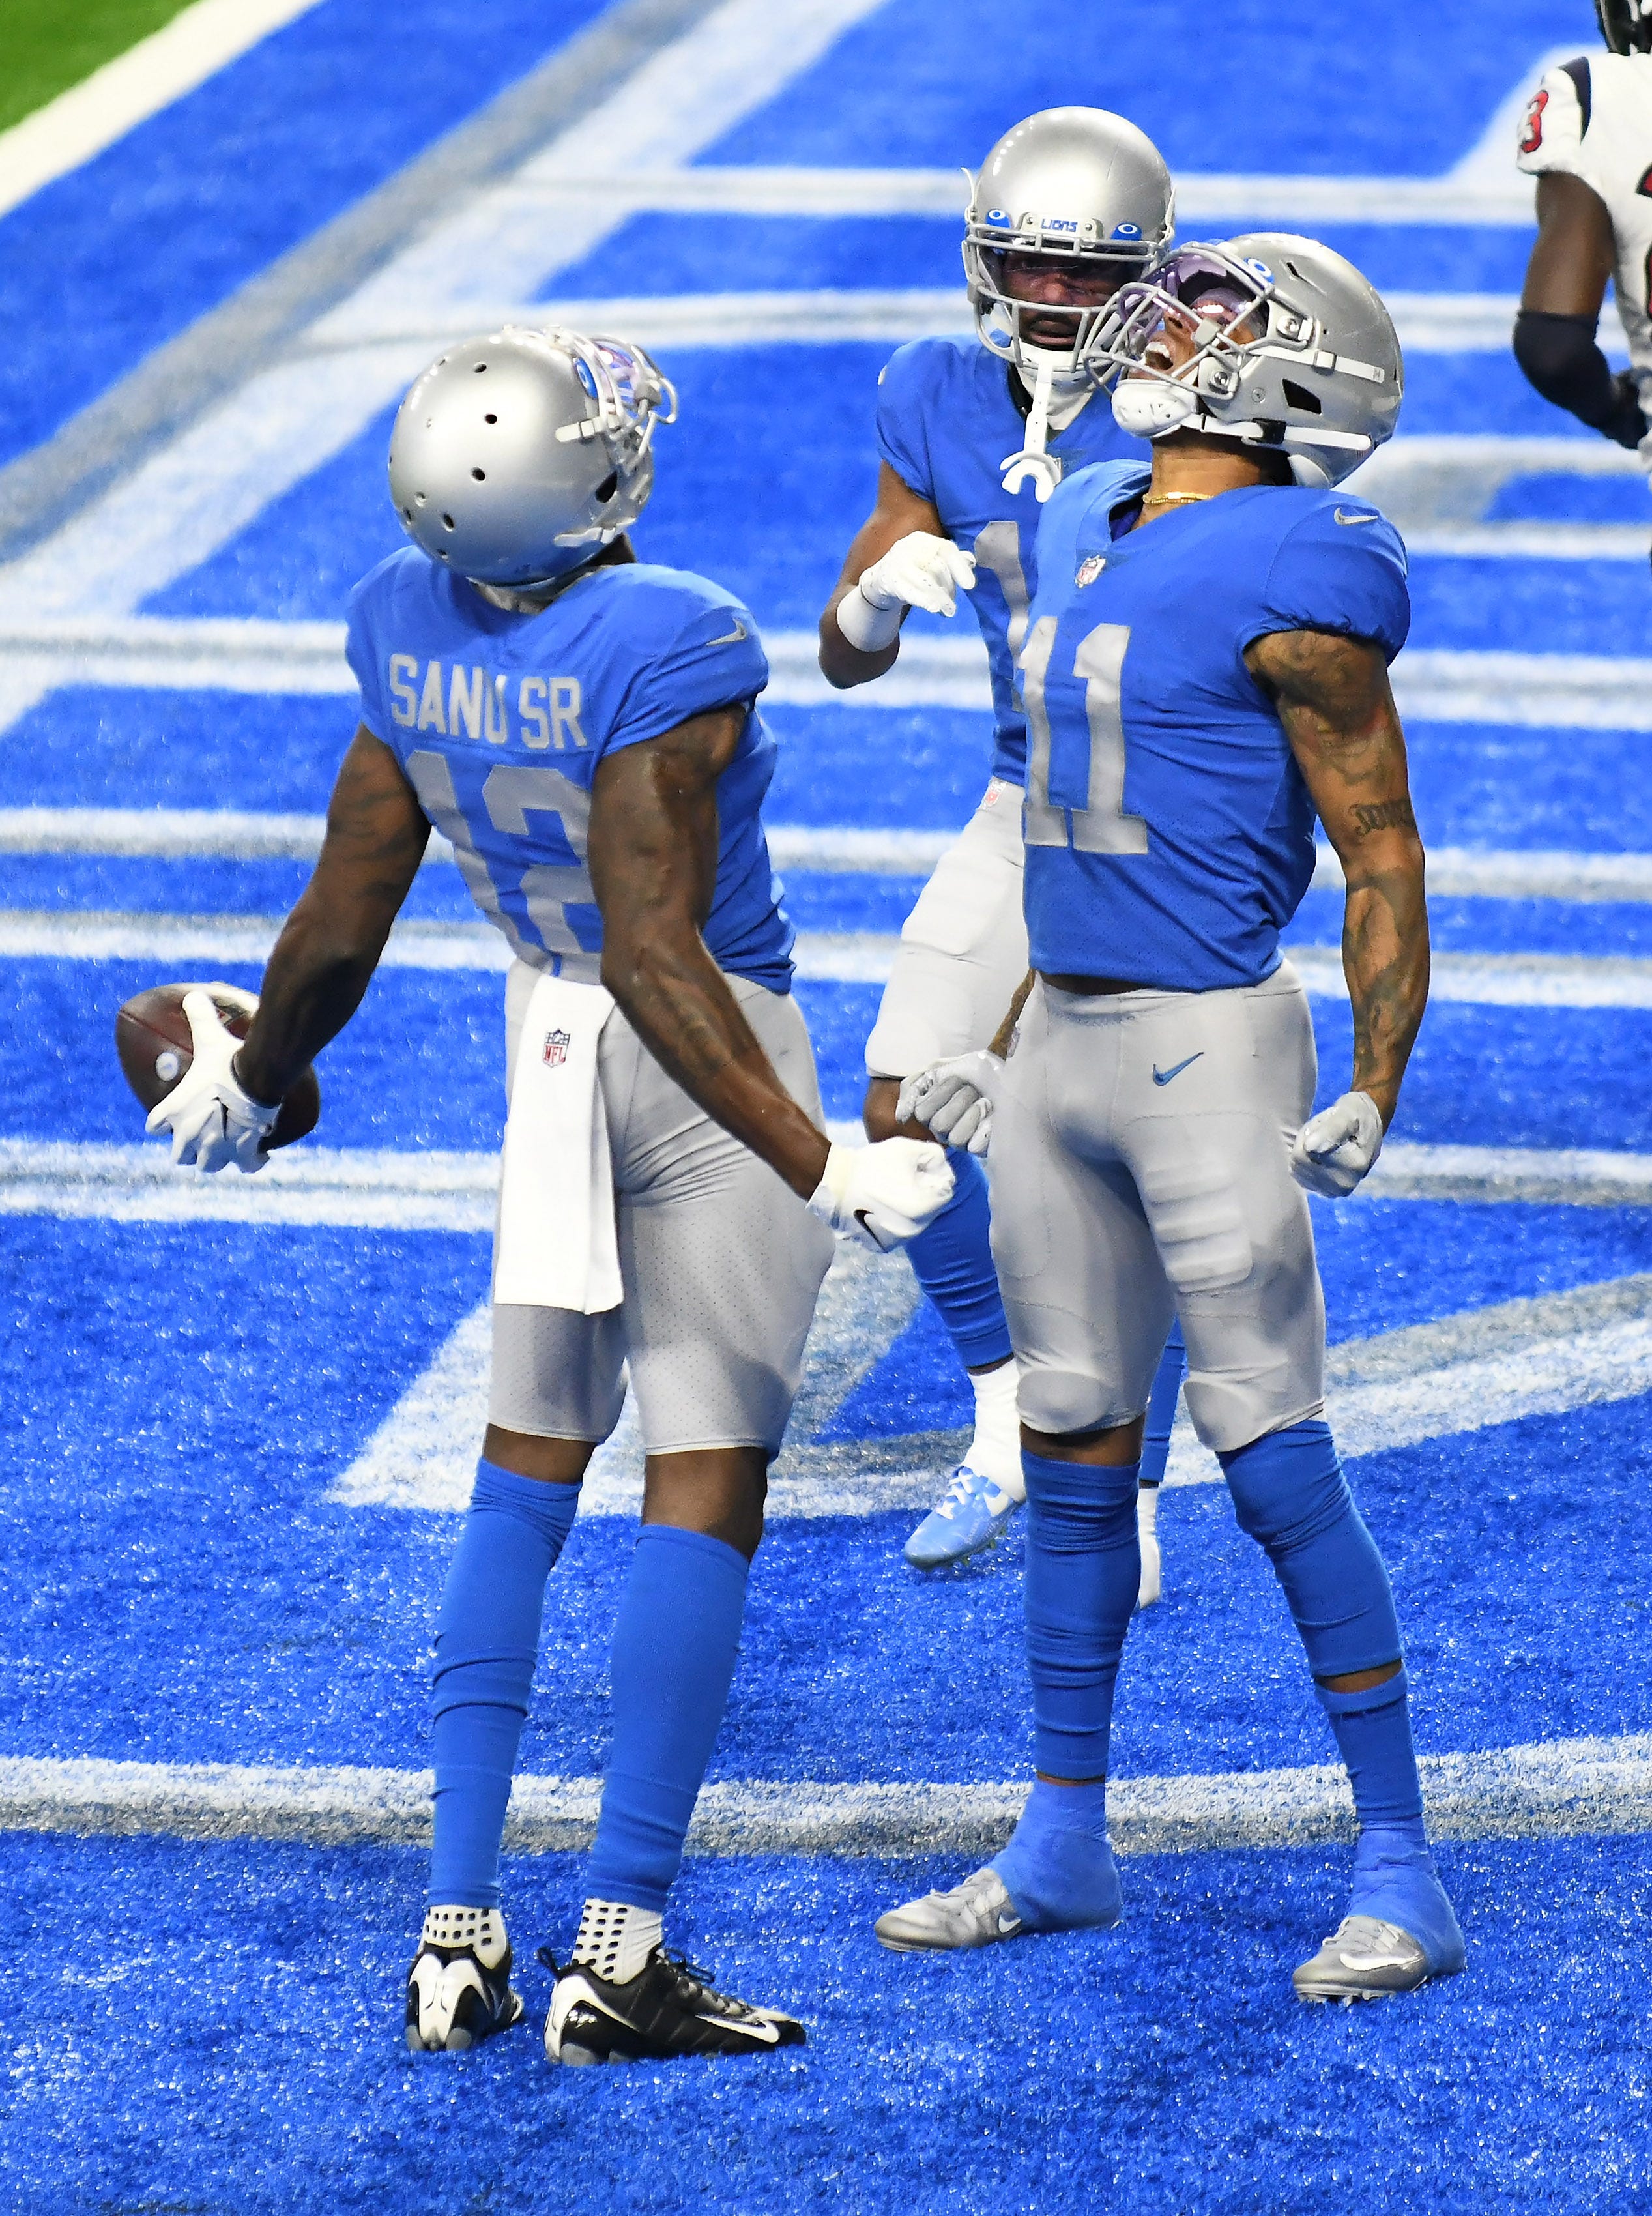 Marvin Jones and the Lions wrap up their 2020 season against the Vikings.